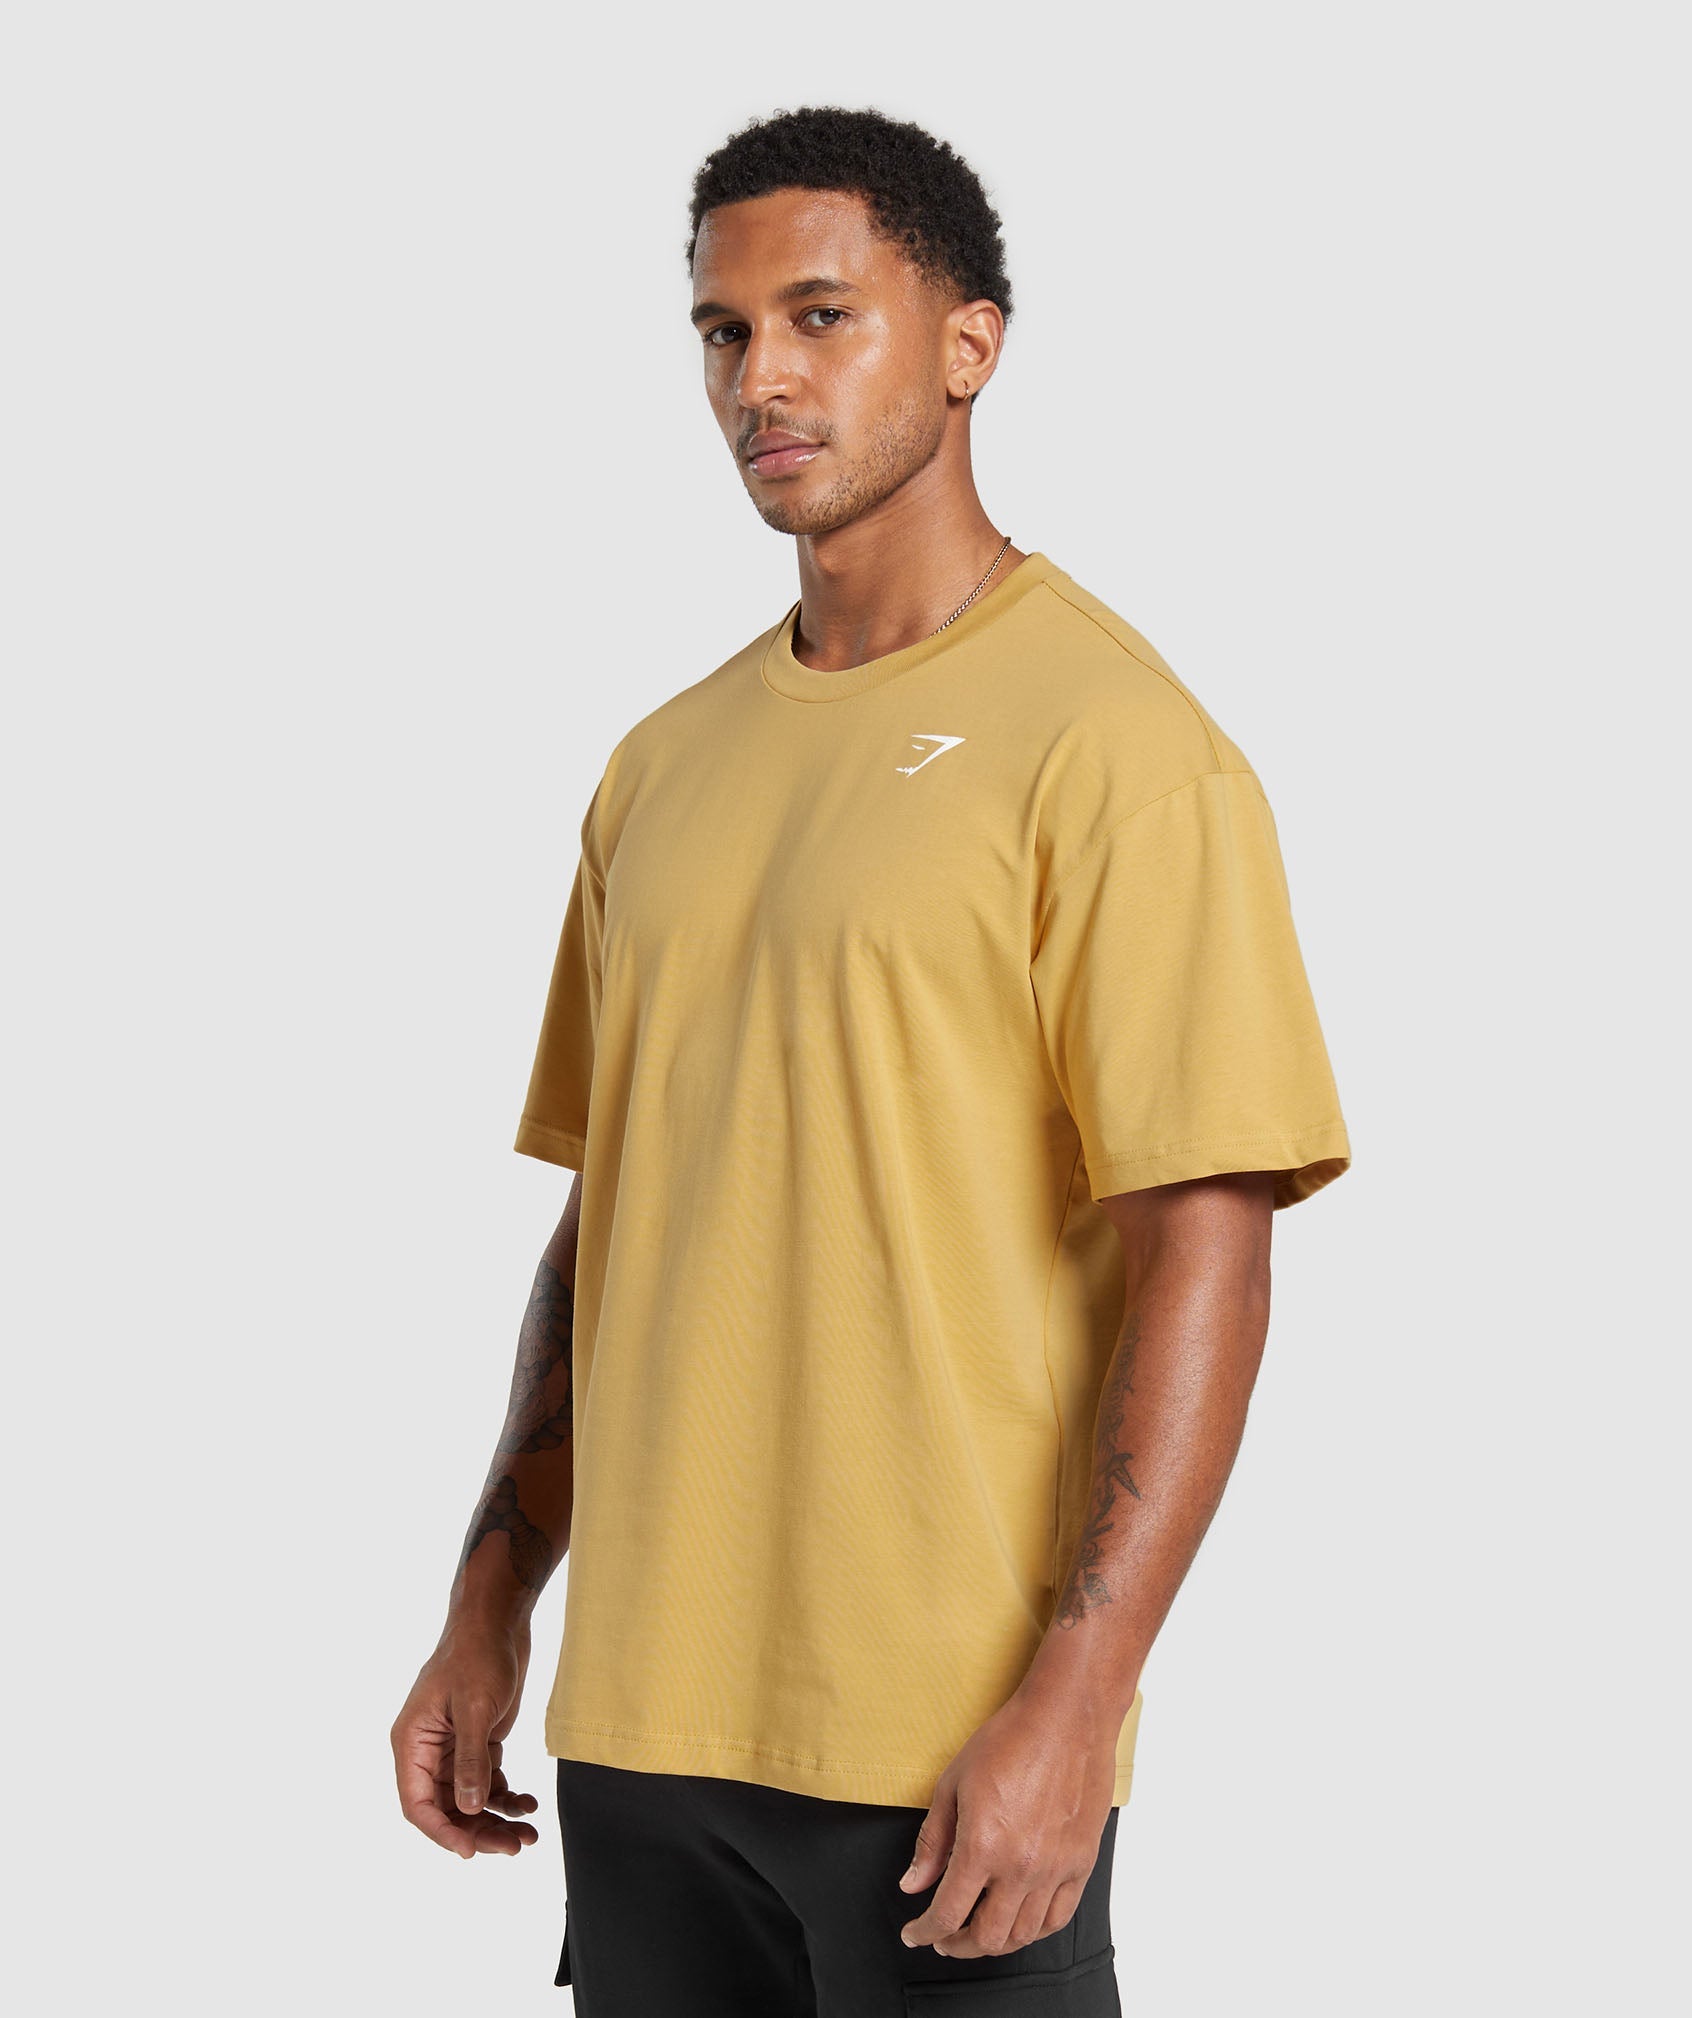 Essential Oversized T-Shirt in Rustic Yellow - view 3